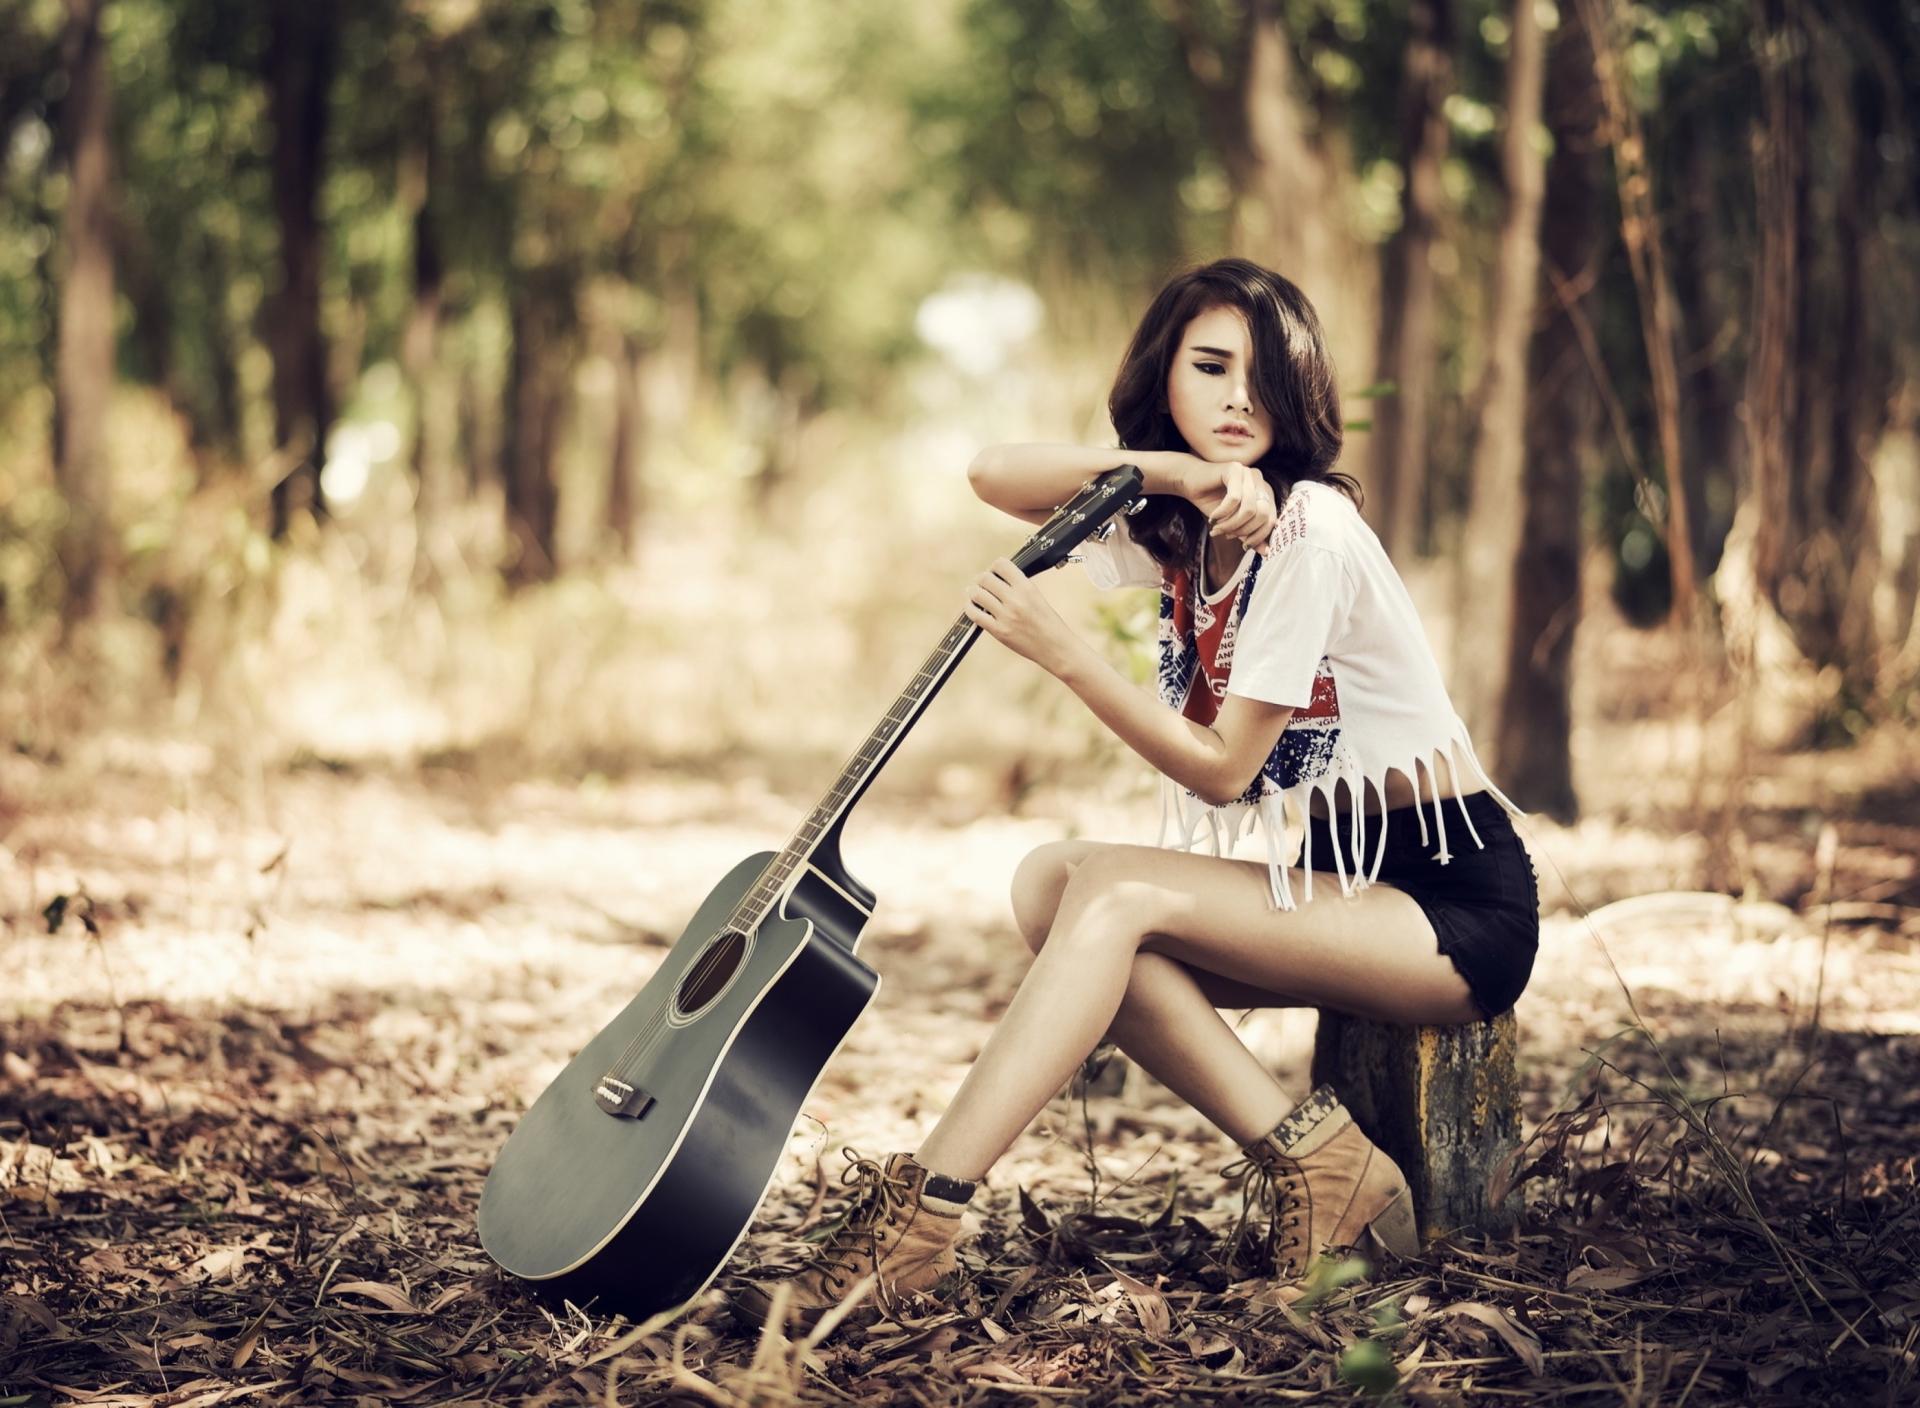 Pretty Brunette Model With Guitar At Meadow screenshot #1 1920x1408